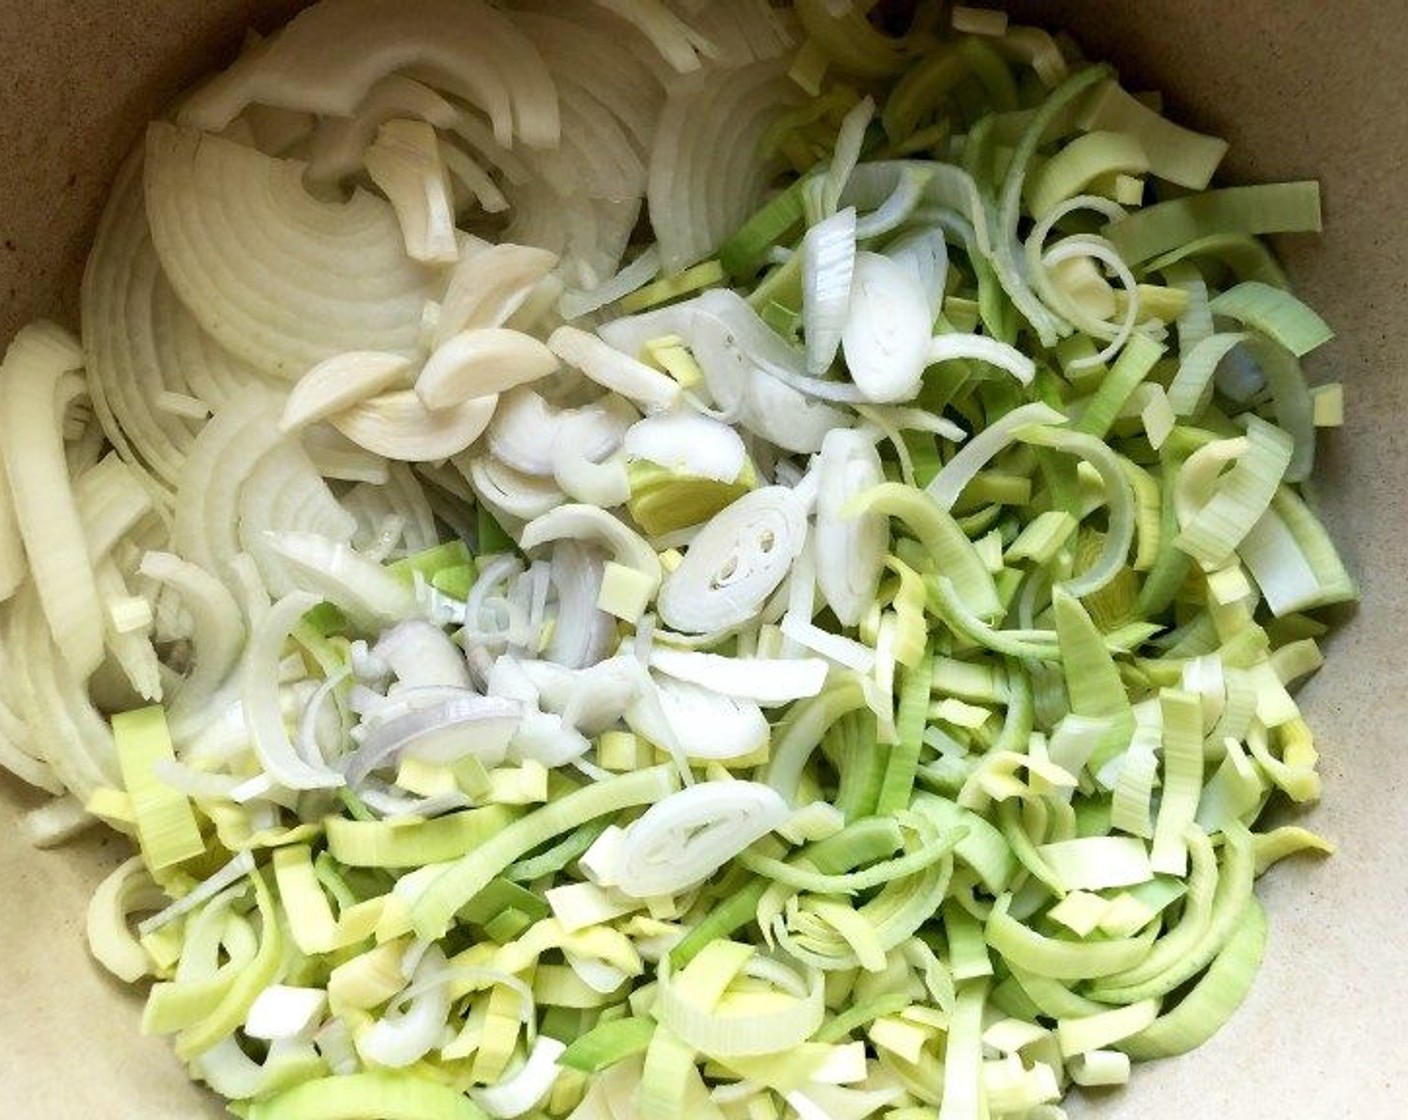 step 2 Add White Onion (1), Leeks (2 stalks), Frozen Green Peas (1 cup), Shallot (1), and Garlic (2 cloves) to the pot with the bacon drippings. Stir in a pinch of sugar and salt. Reduce the heat to low and cook, uncovered, for about 15 to 20 minutes or until softened and translucent.